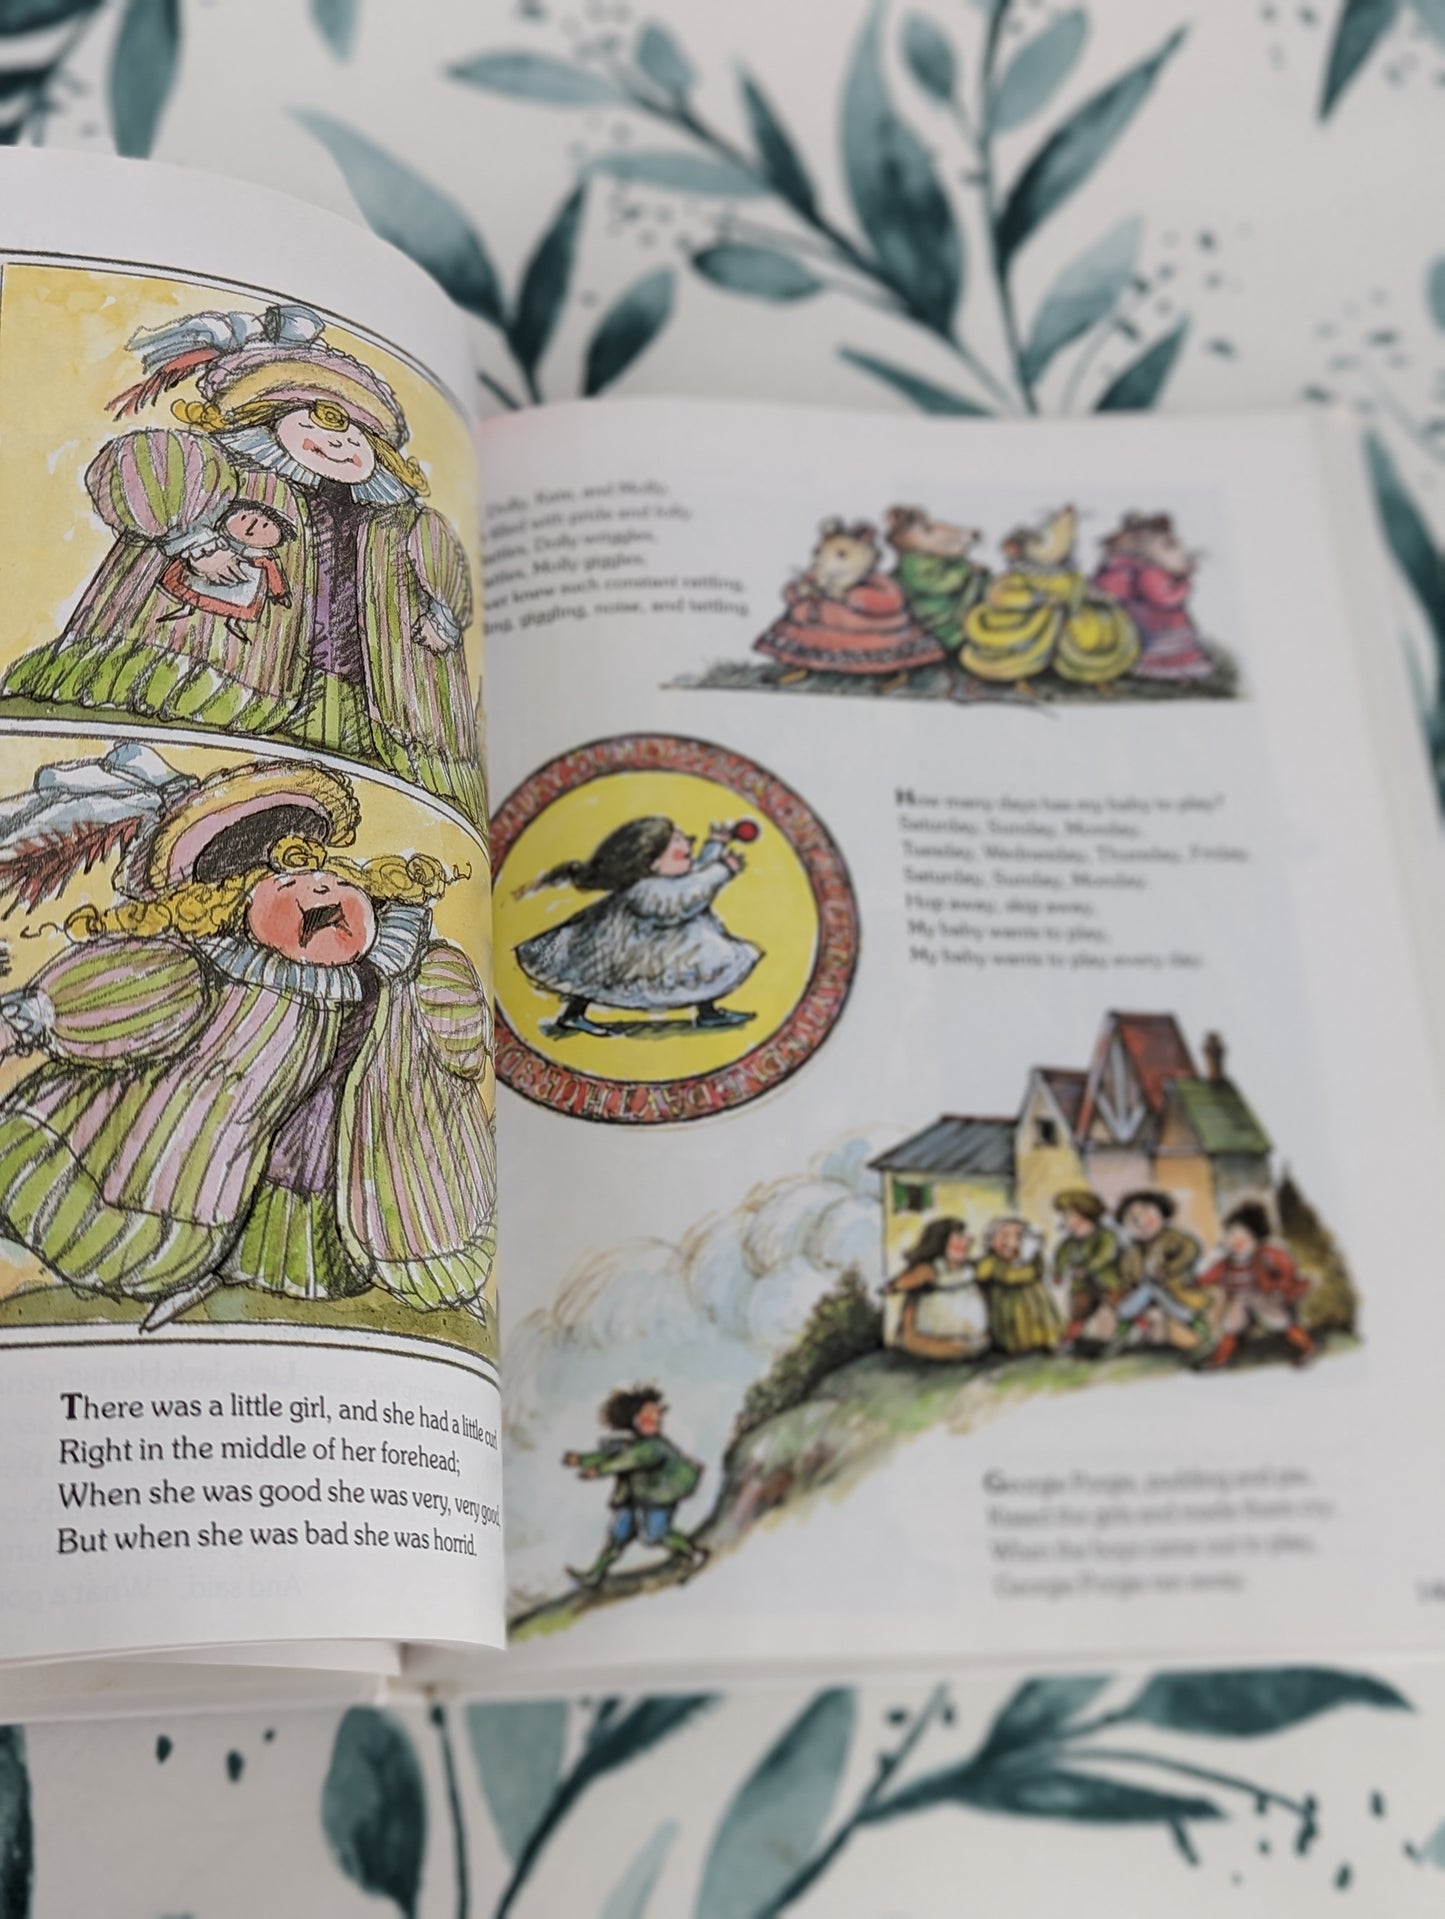 The Arnold Lobel Book of Mother Goose